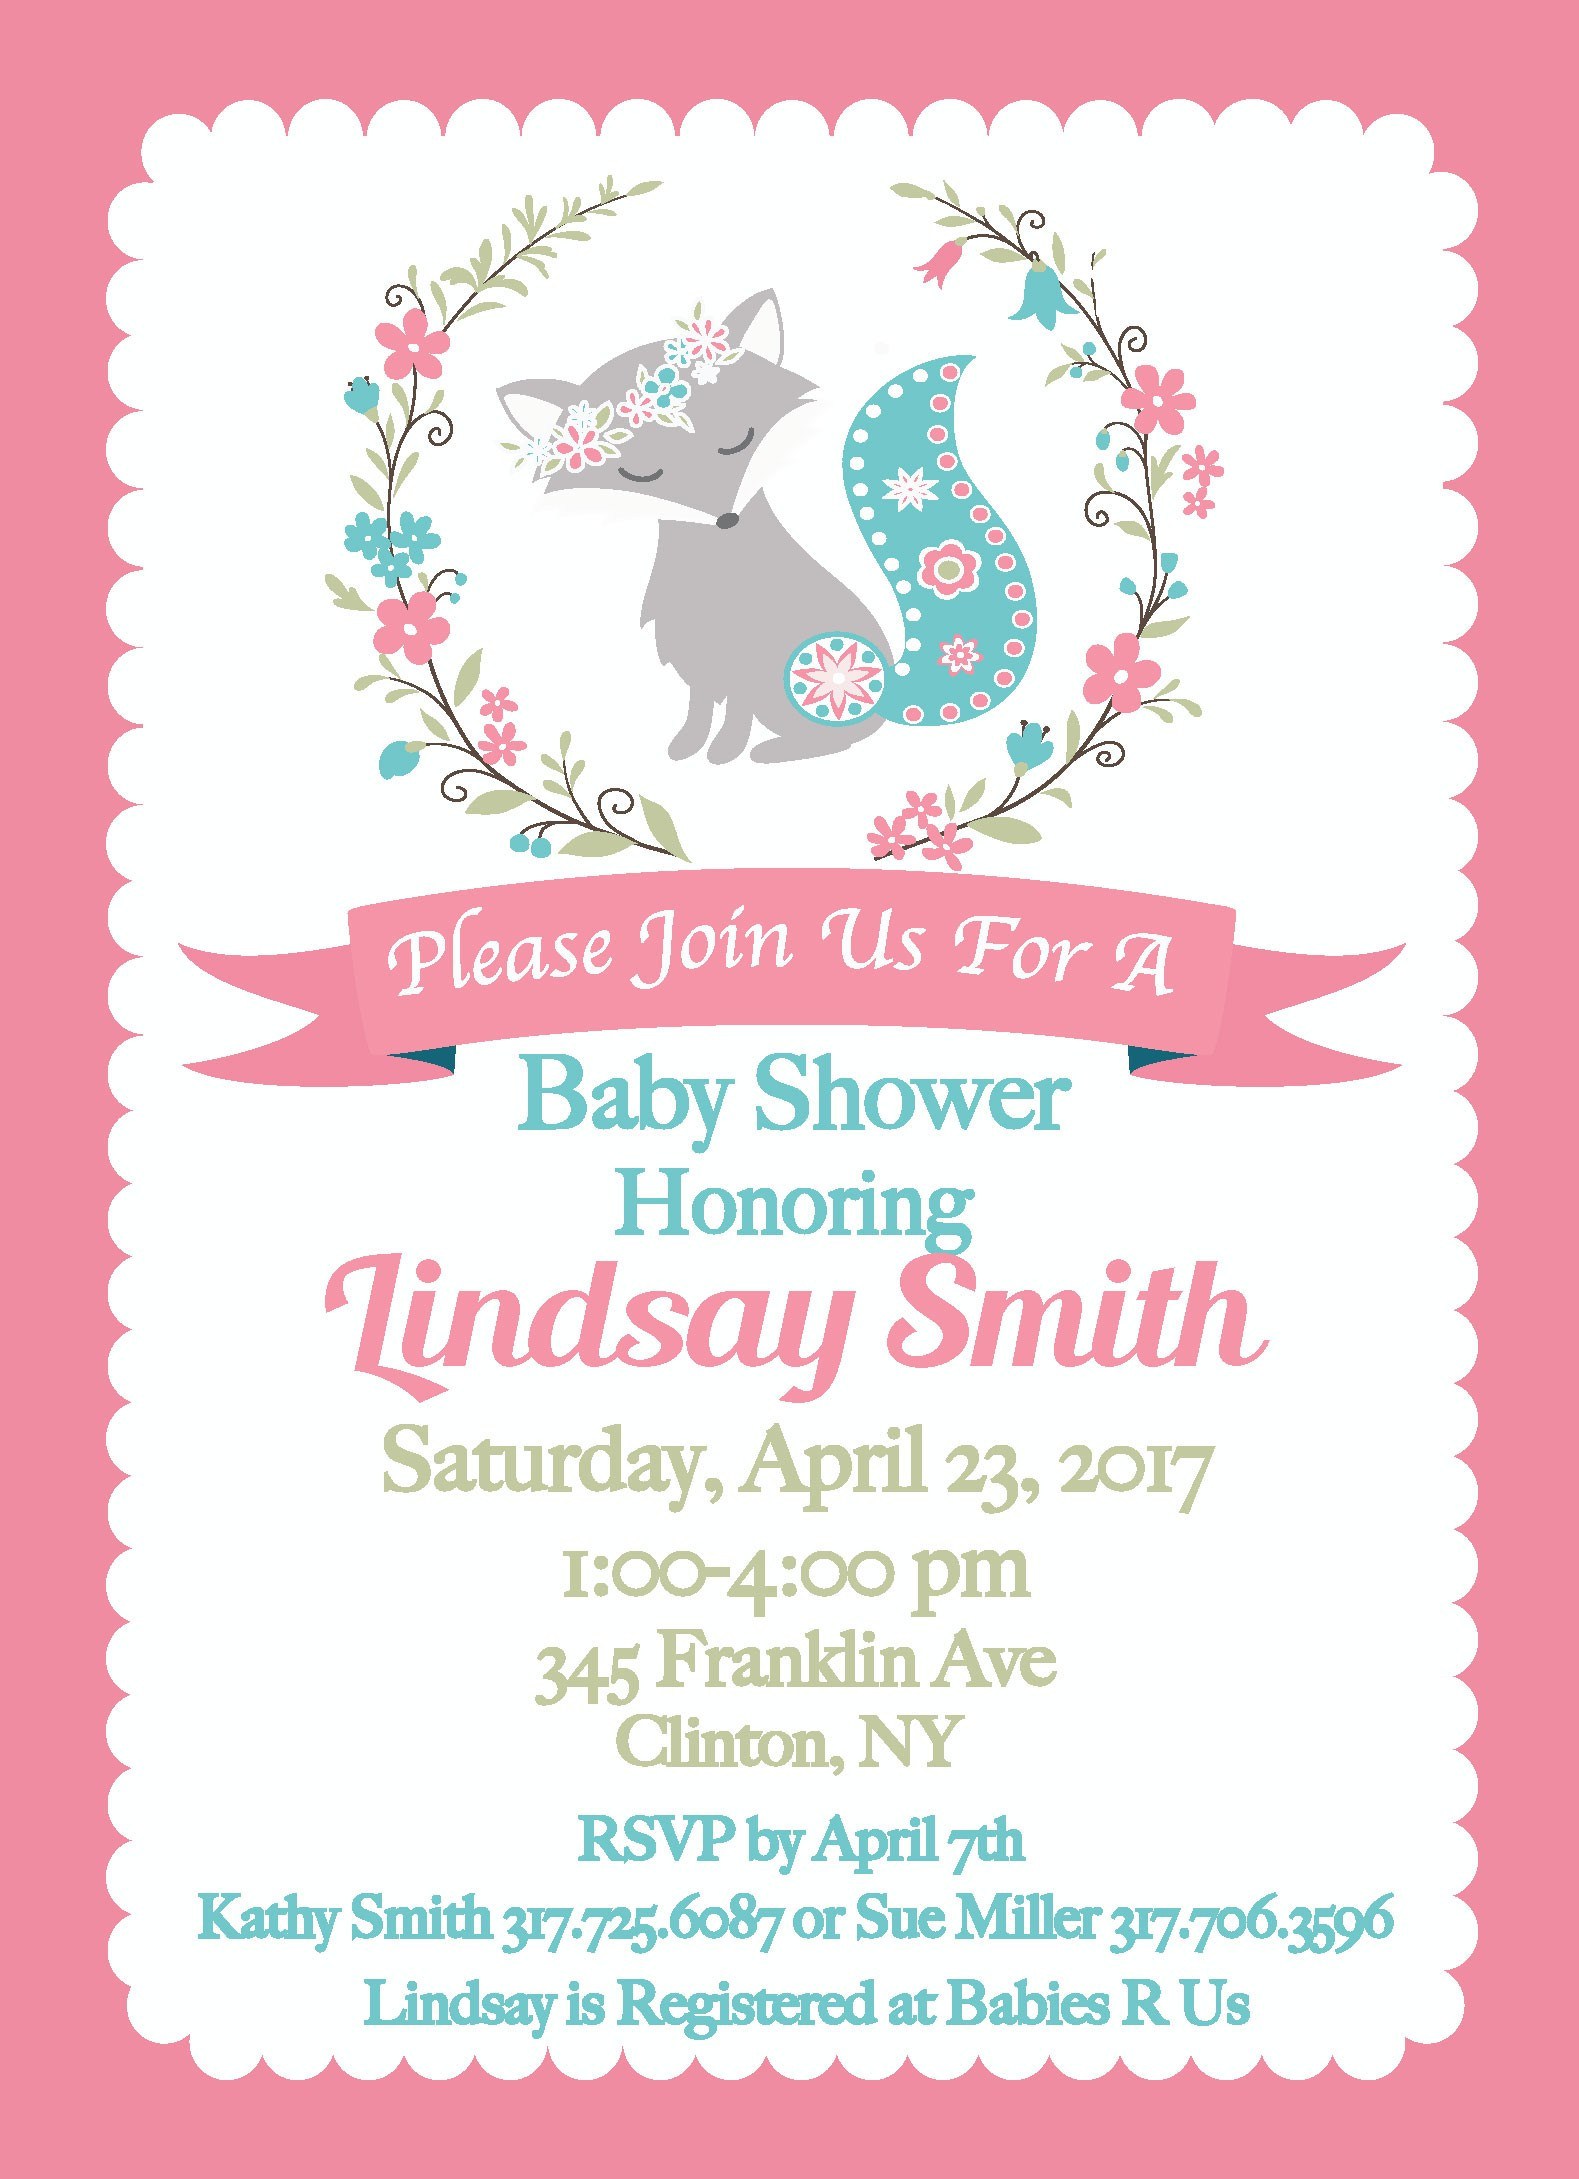 Full Size of Baby Shower:delightful Baby Shower Invitation Wording Picture Designs Baby Shower Invitation Wording Baby Boy Shower Favors Baby Shower Baby Shower Baby Shower Adalah Baby Shower Quotes Baby Shower Wishing Well Best Baby Shower Gifts 2018 Corner Baby Shower Thank You Cards Wording Gallery Bridal